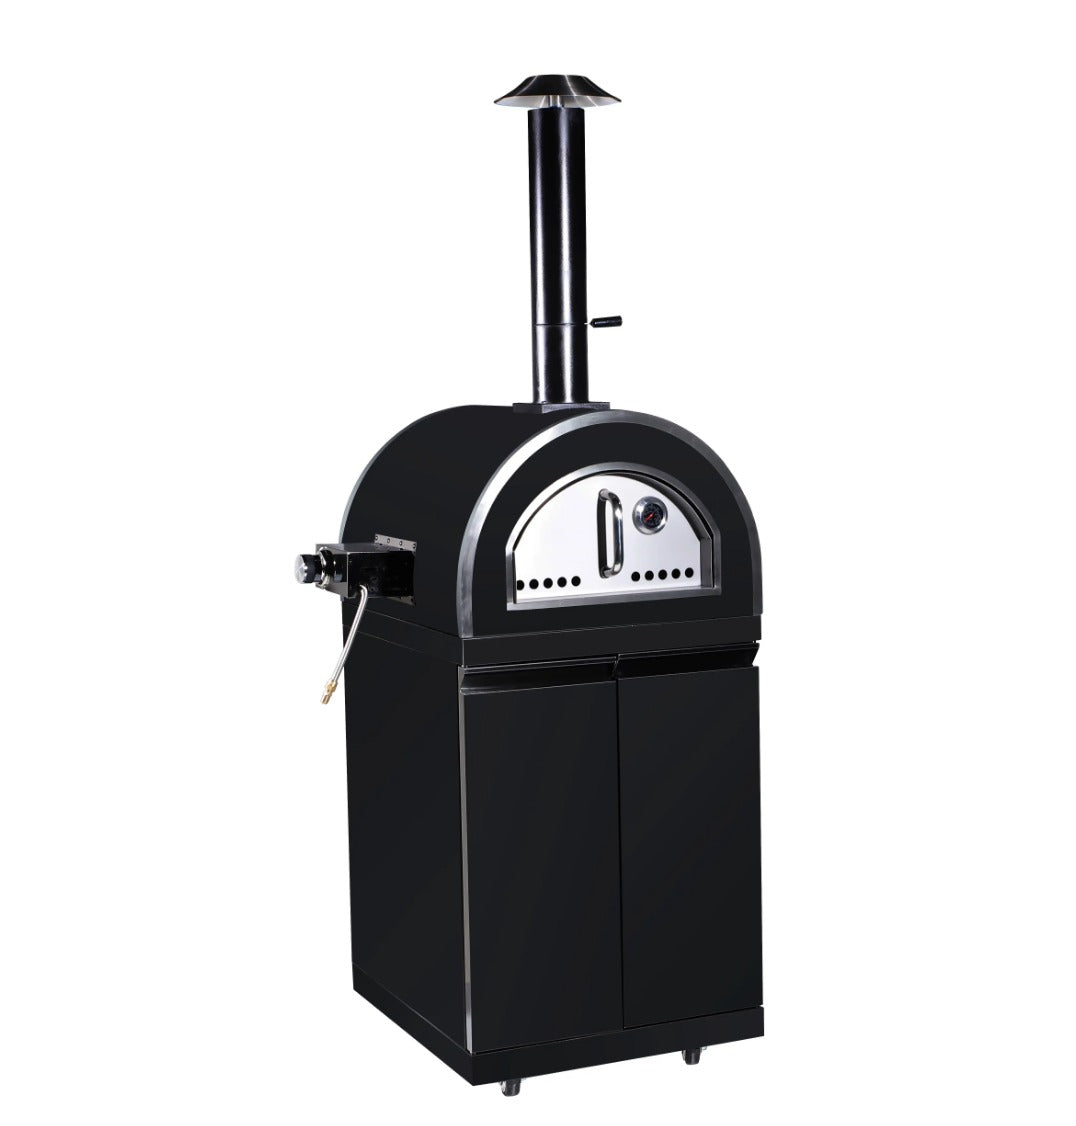 Stainless Steel Black Modular 24 inch Pizza Oven and Cabinet , can be combined to build your own Outdoor Kitchen